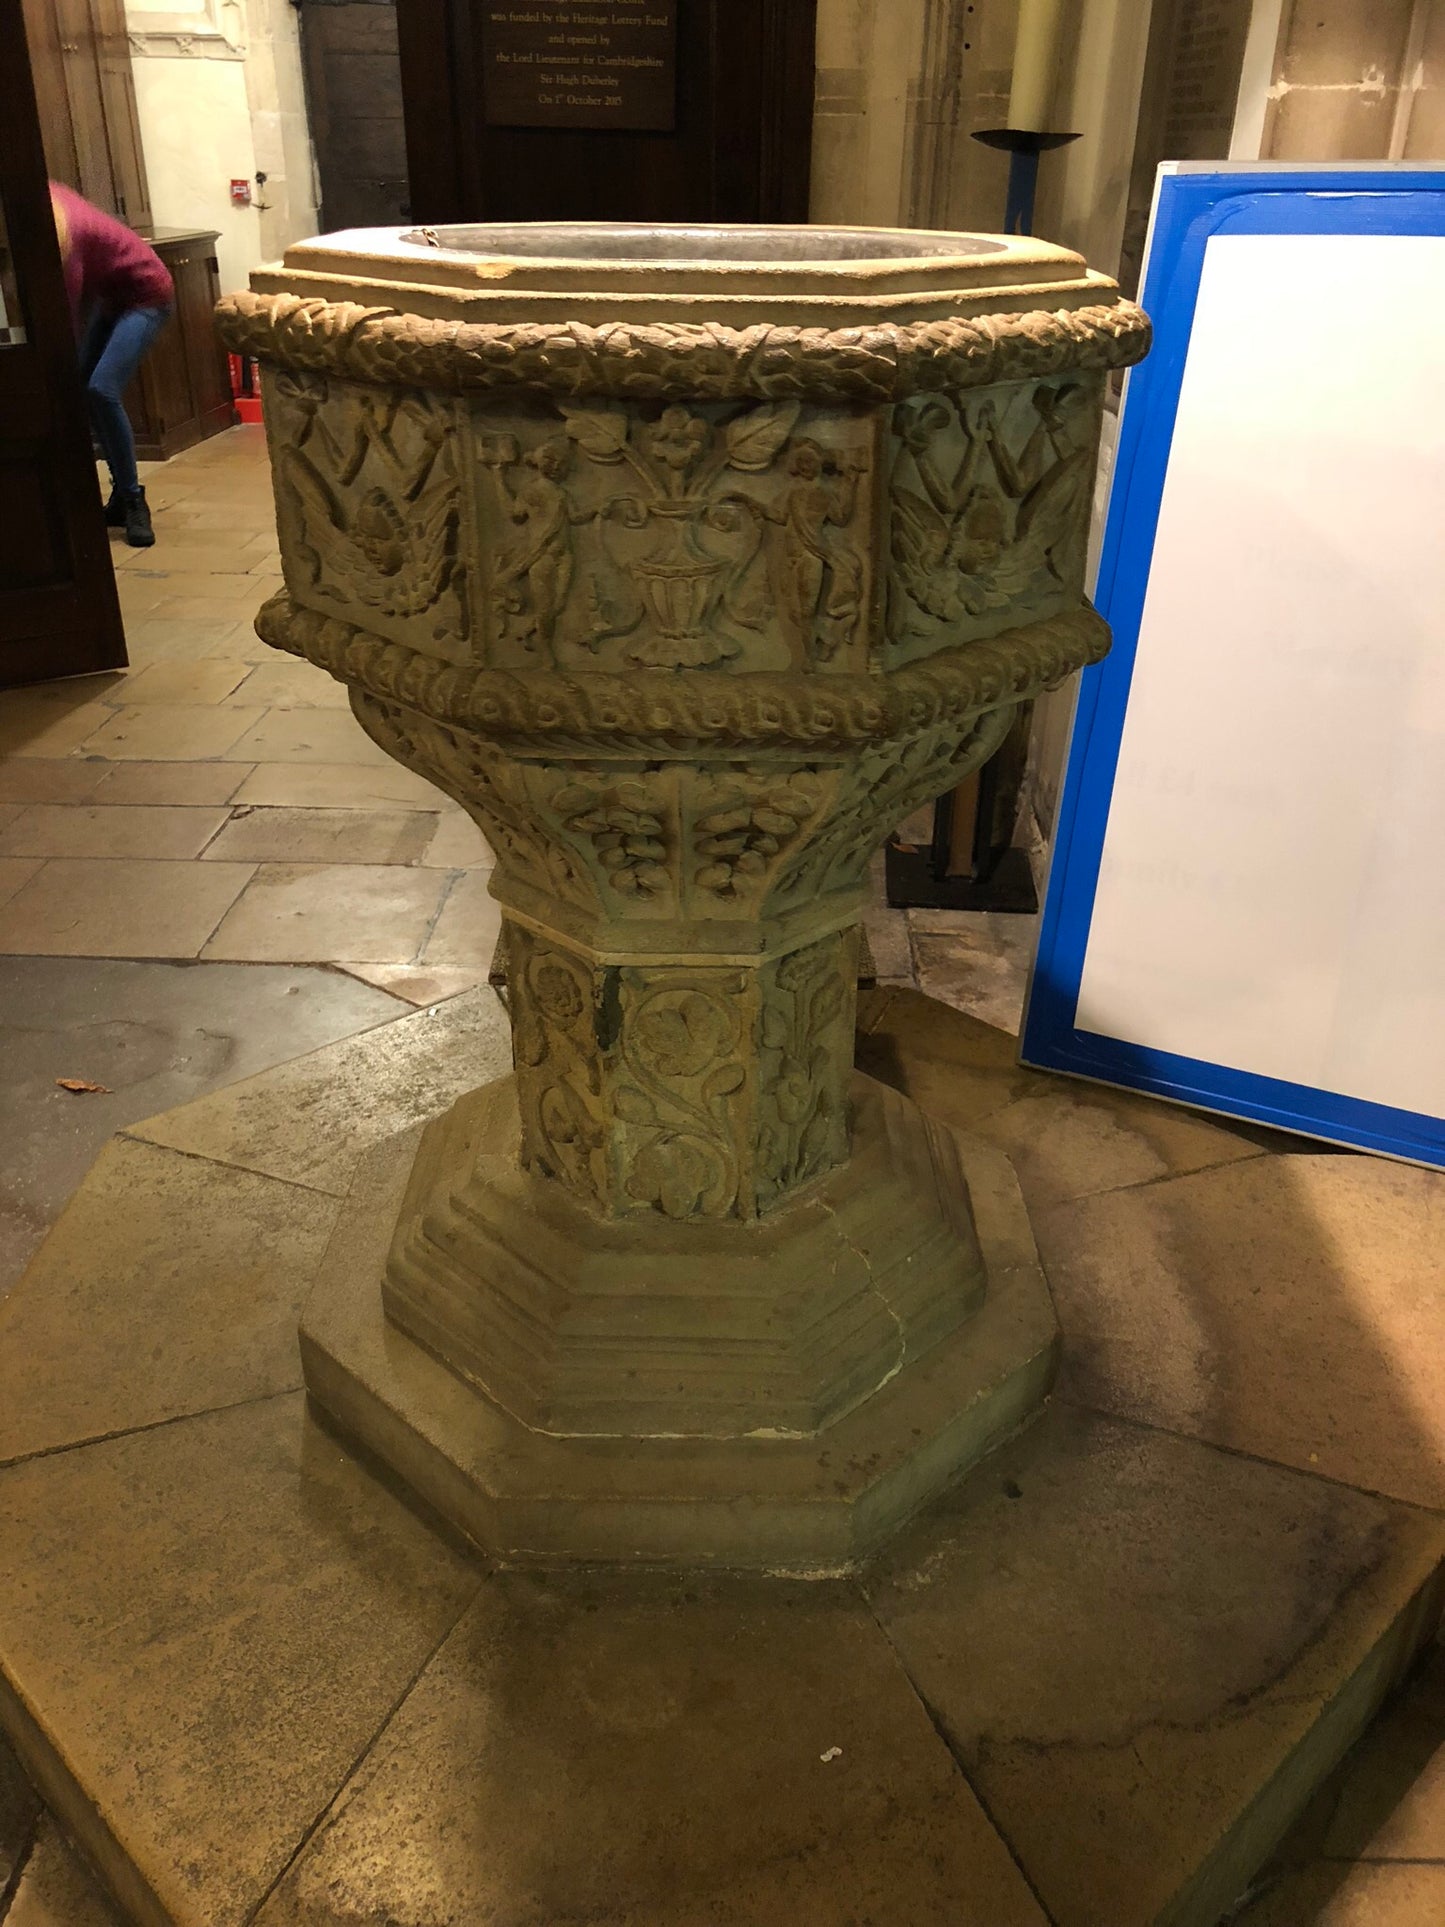 Font, Great St Mary’s, Cambridge